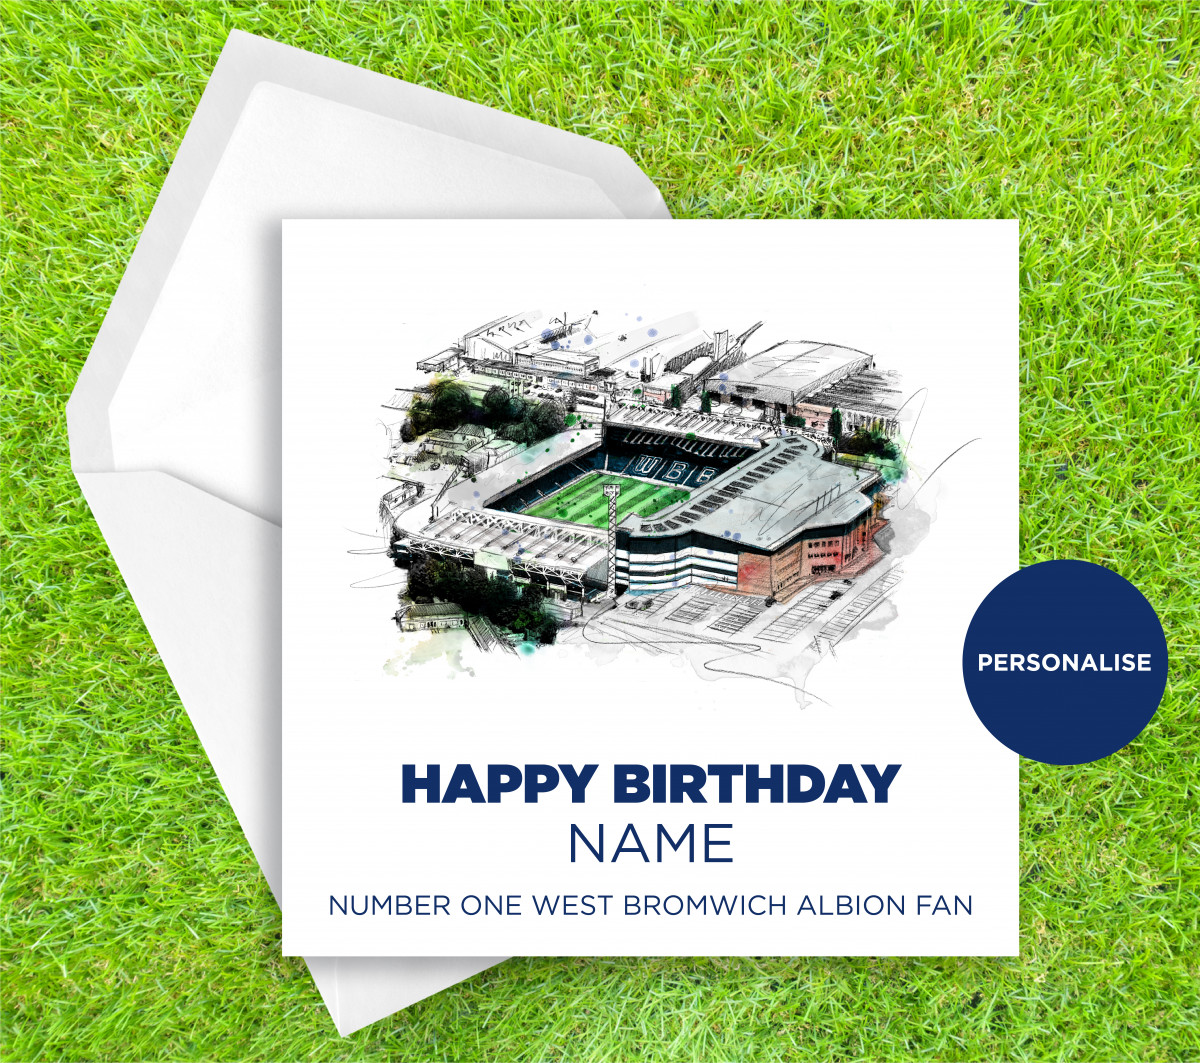 West Bromwich Albion, The Hawthorns, personalised birthday card